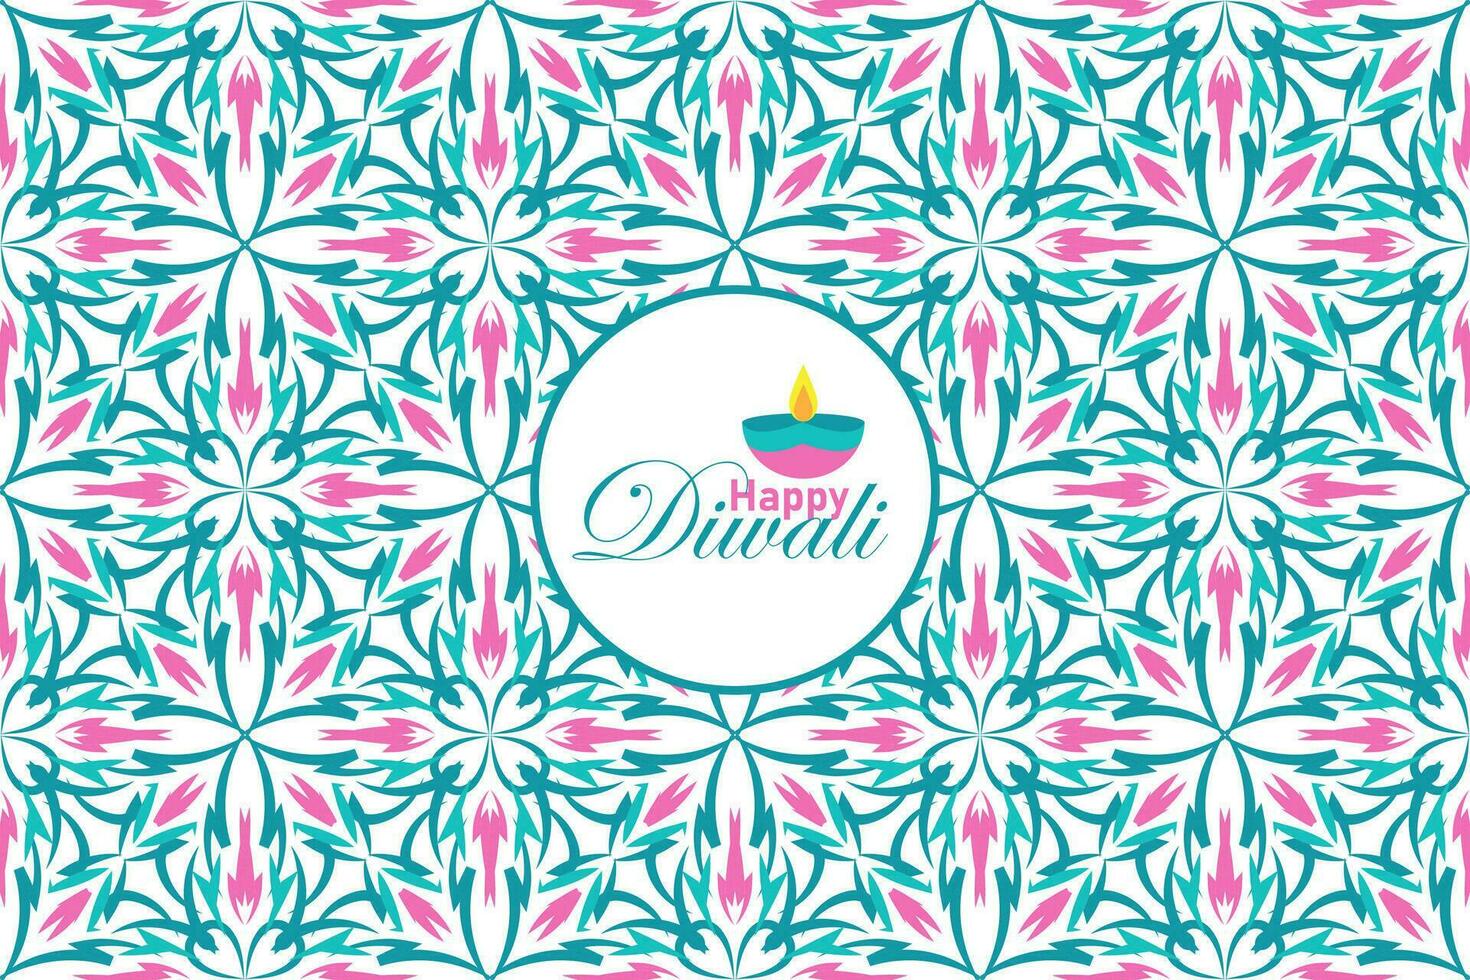 Happy Diwali seamless pattern. Indian festival of lights. Vector abstract vintage illustration for the holiday, lights and other objects for background or poster.